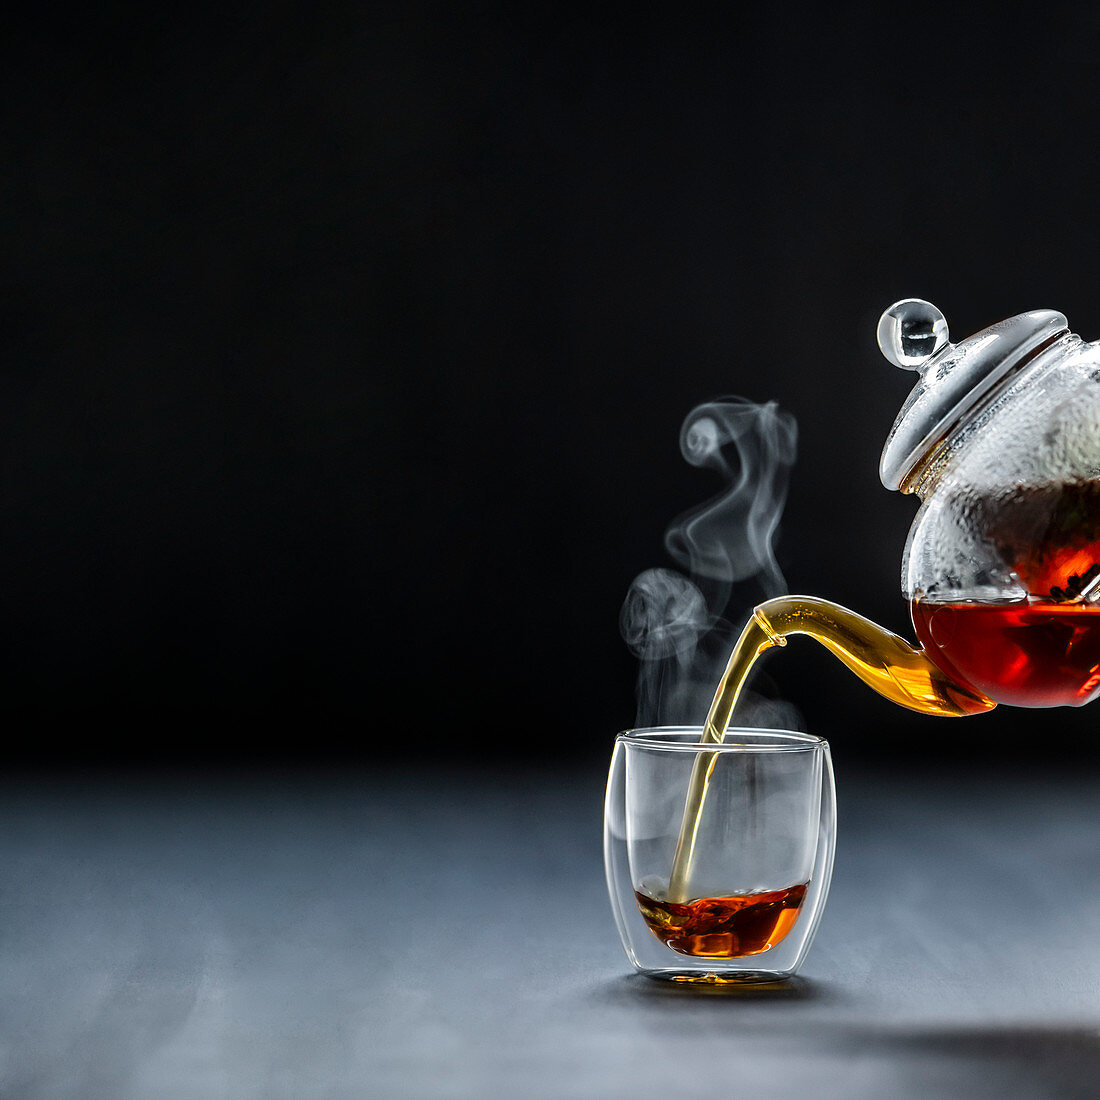 Pouring black tea, steaming